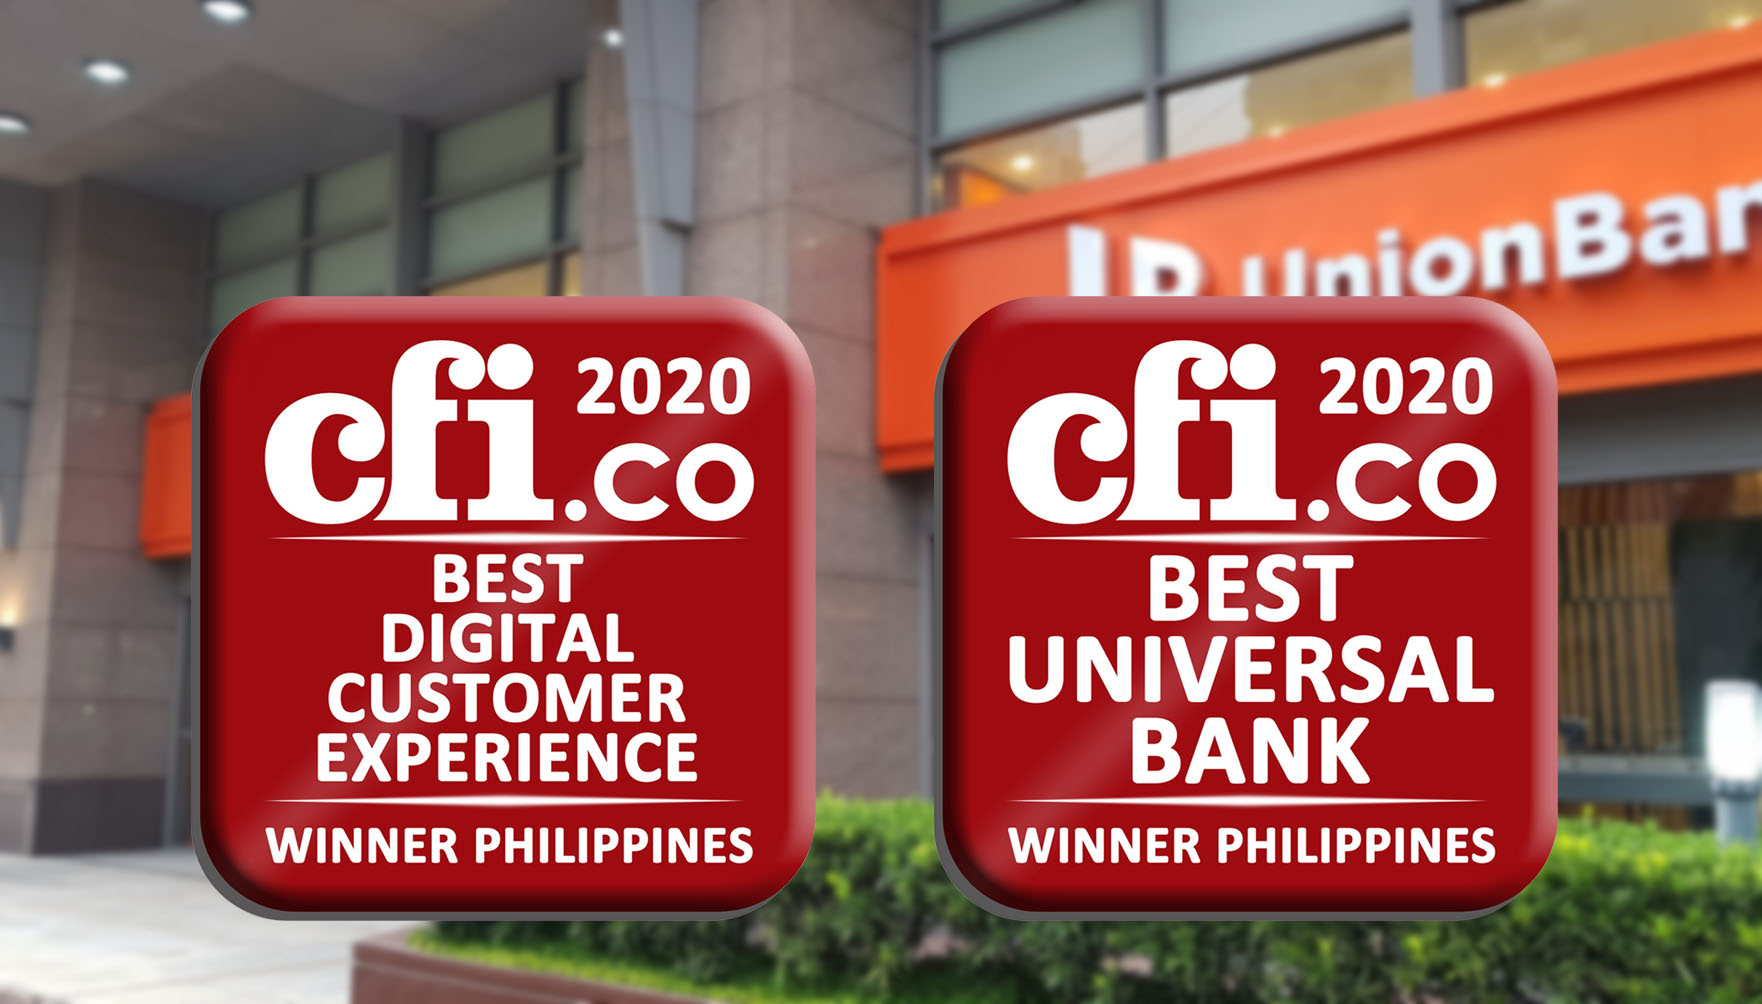 UnionBank wins Best Universal Bank Philippines and  Best Digital Customer Experience Philippines for 2020